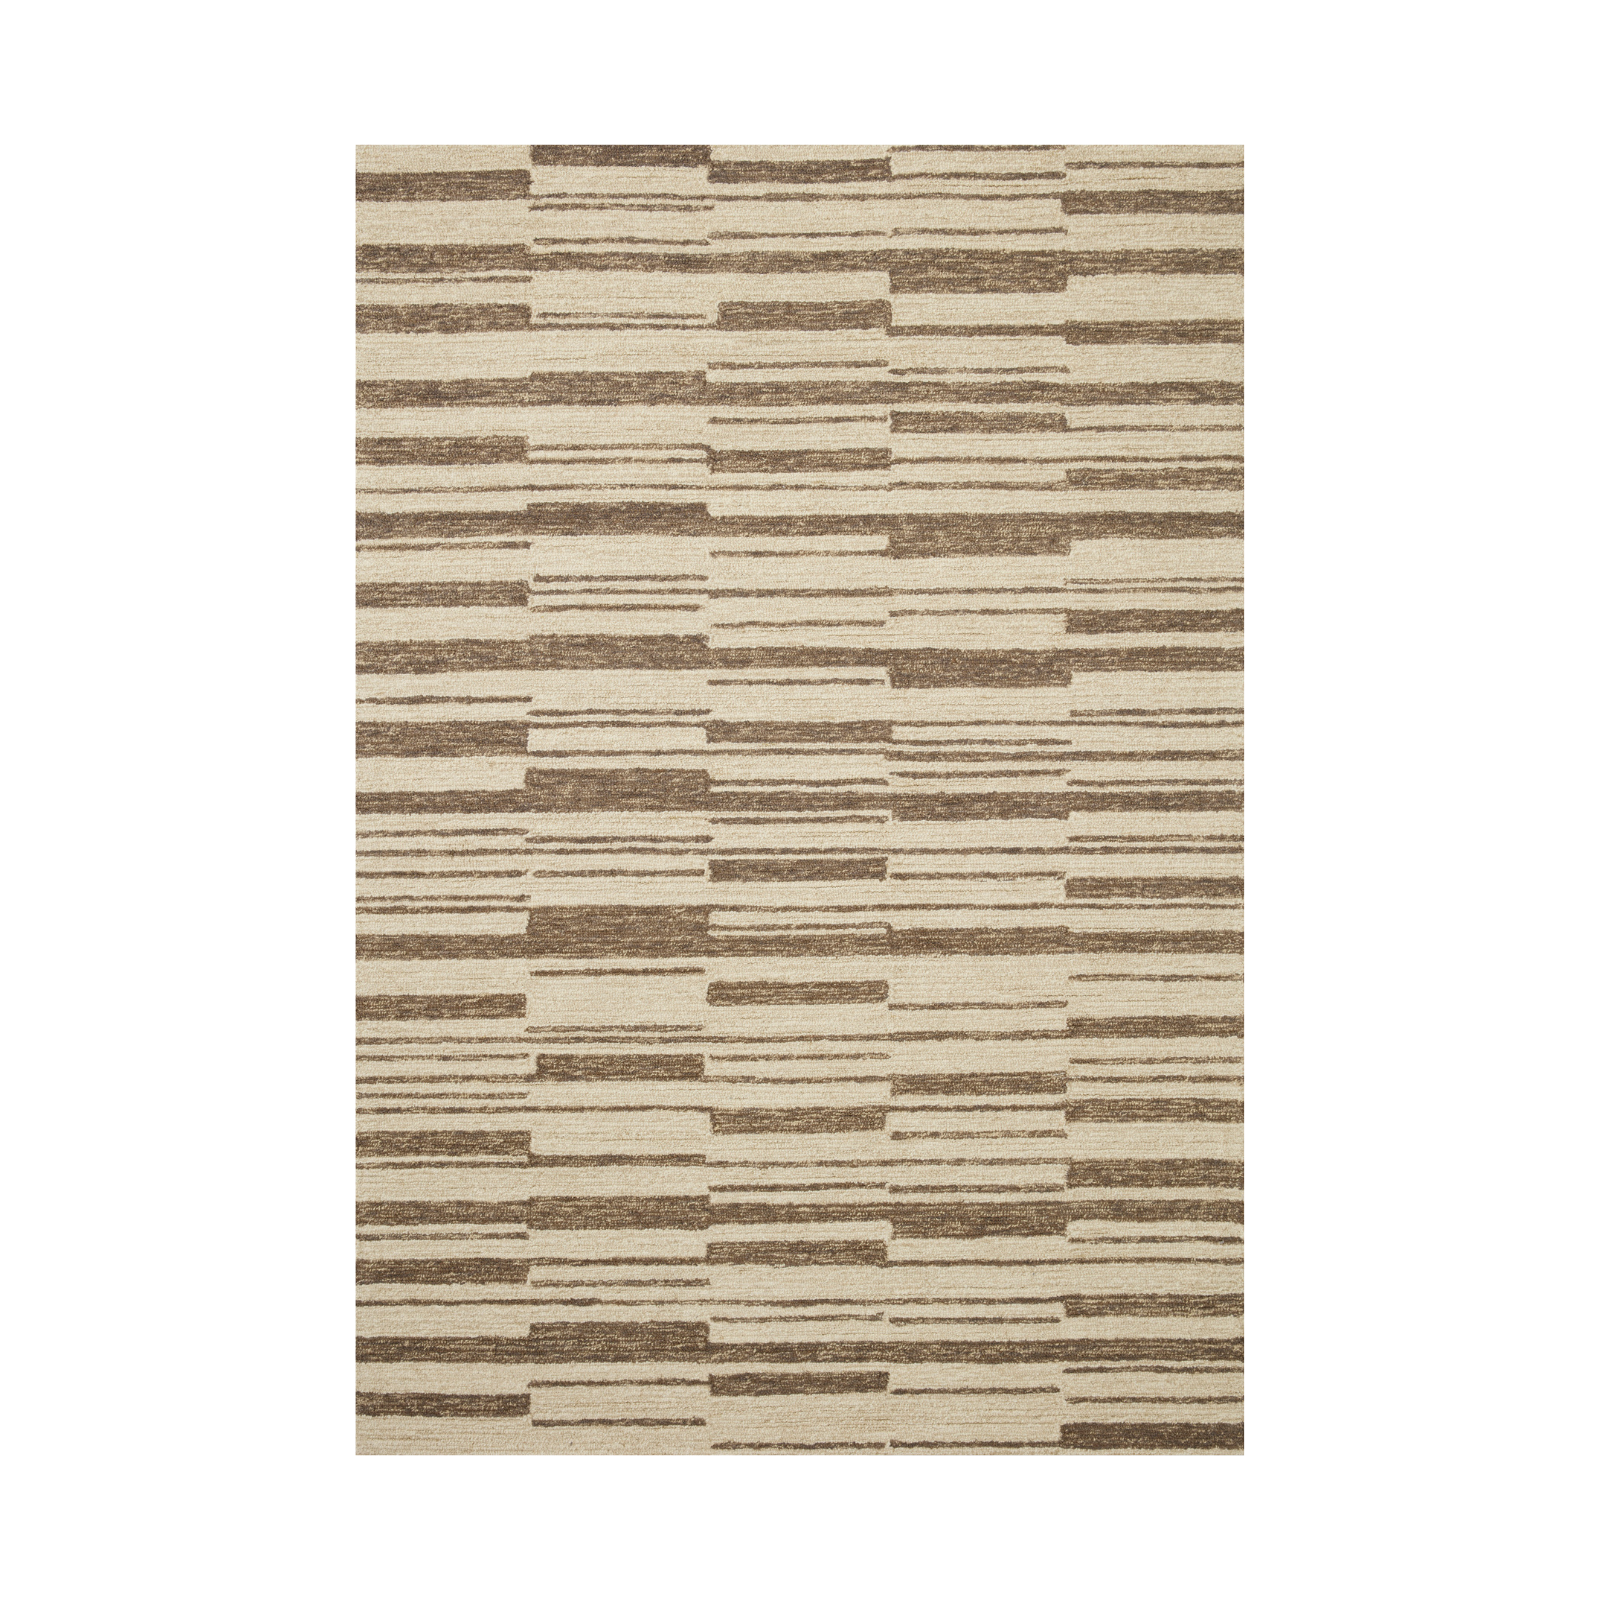 OVERSTOCK RUG - Chris Loves Julia x Loloi Polly Beige / Tobacco - 3'6" x 5'6"